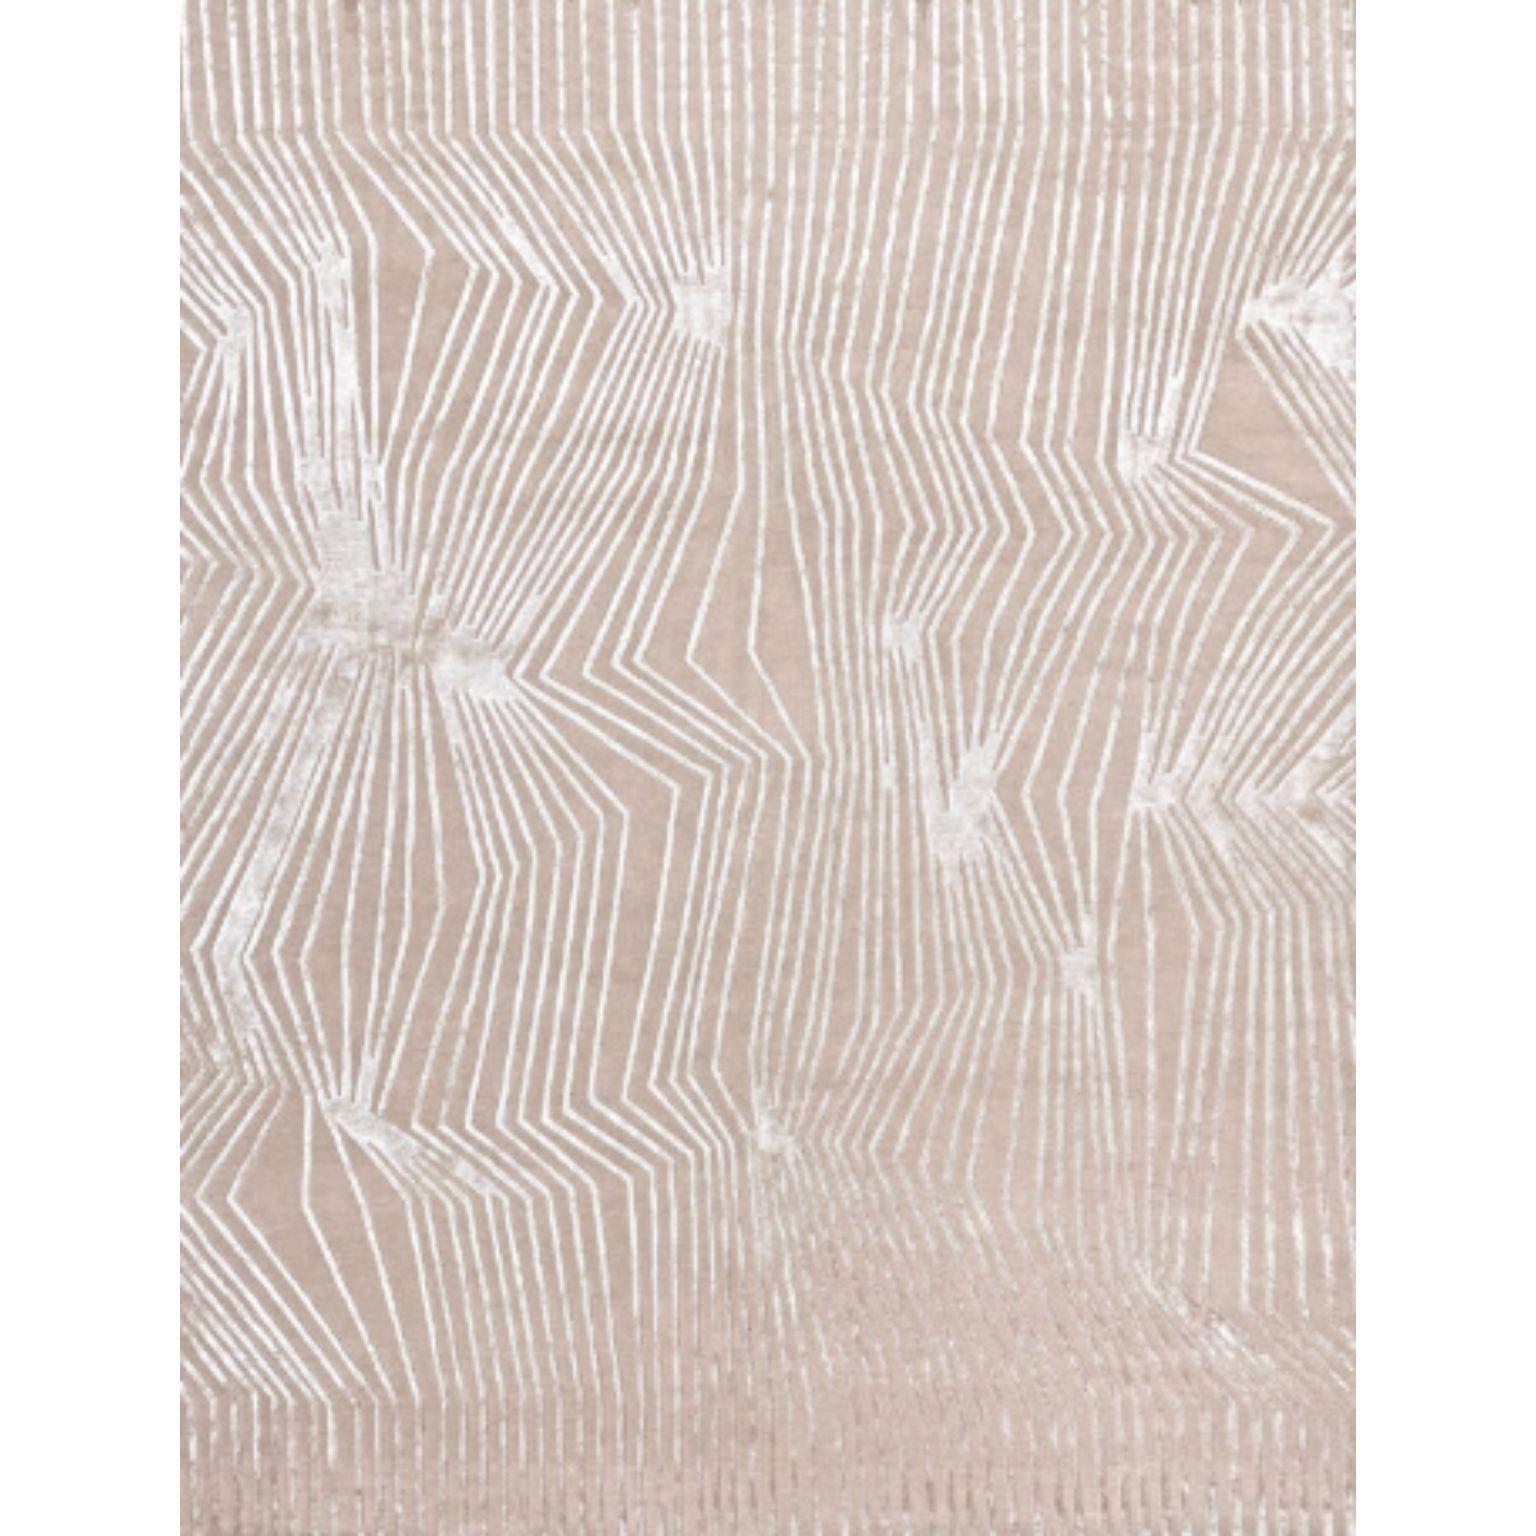 Hydra 200 rug by Illulian
Dimensions: D 300 x H 200 cm 
Materials: Wool 50%, silk 50%
Variations available and prices may vary according to materials and sizes.

Illulian, historic and prestigious rug company brand, internationally renowned in